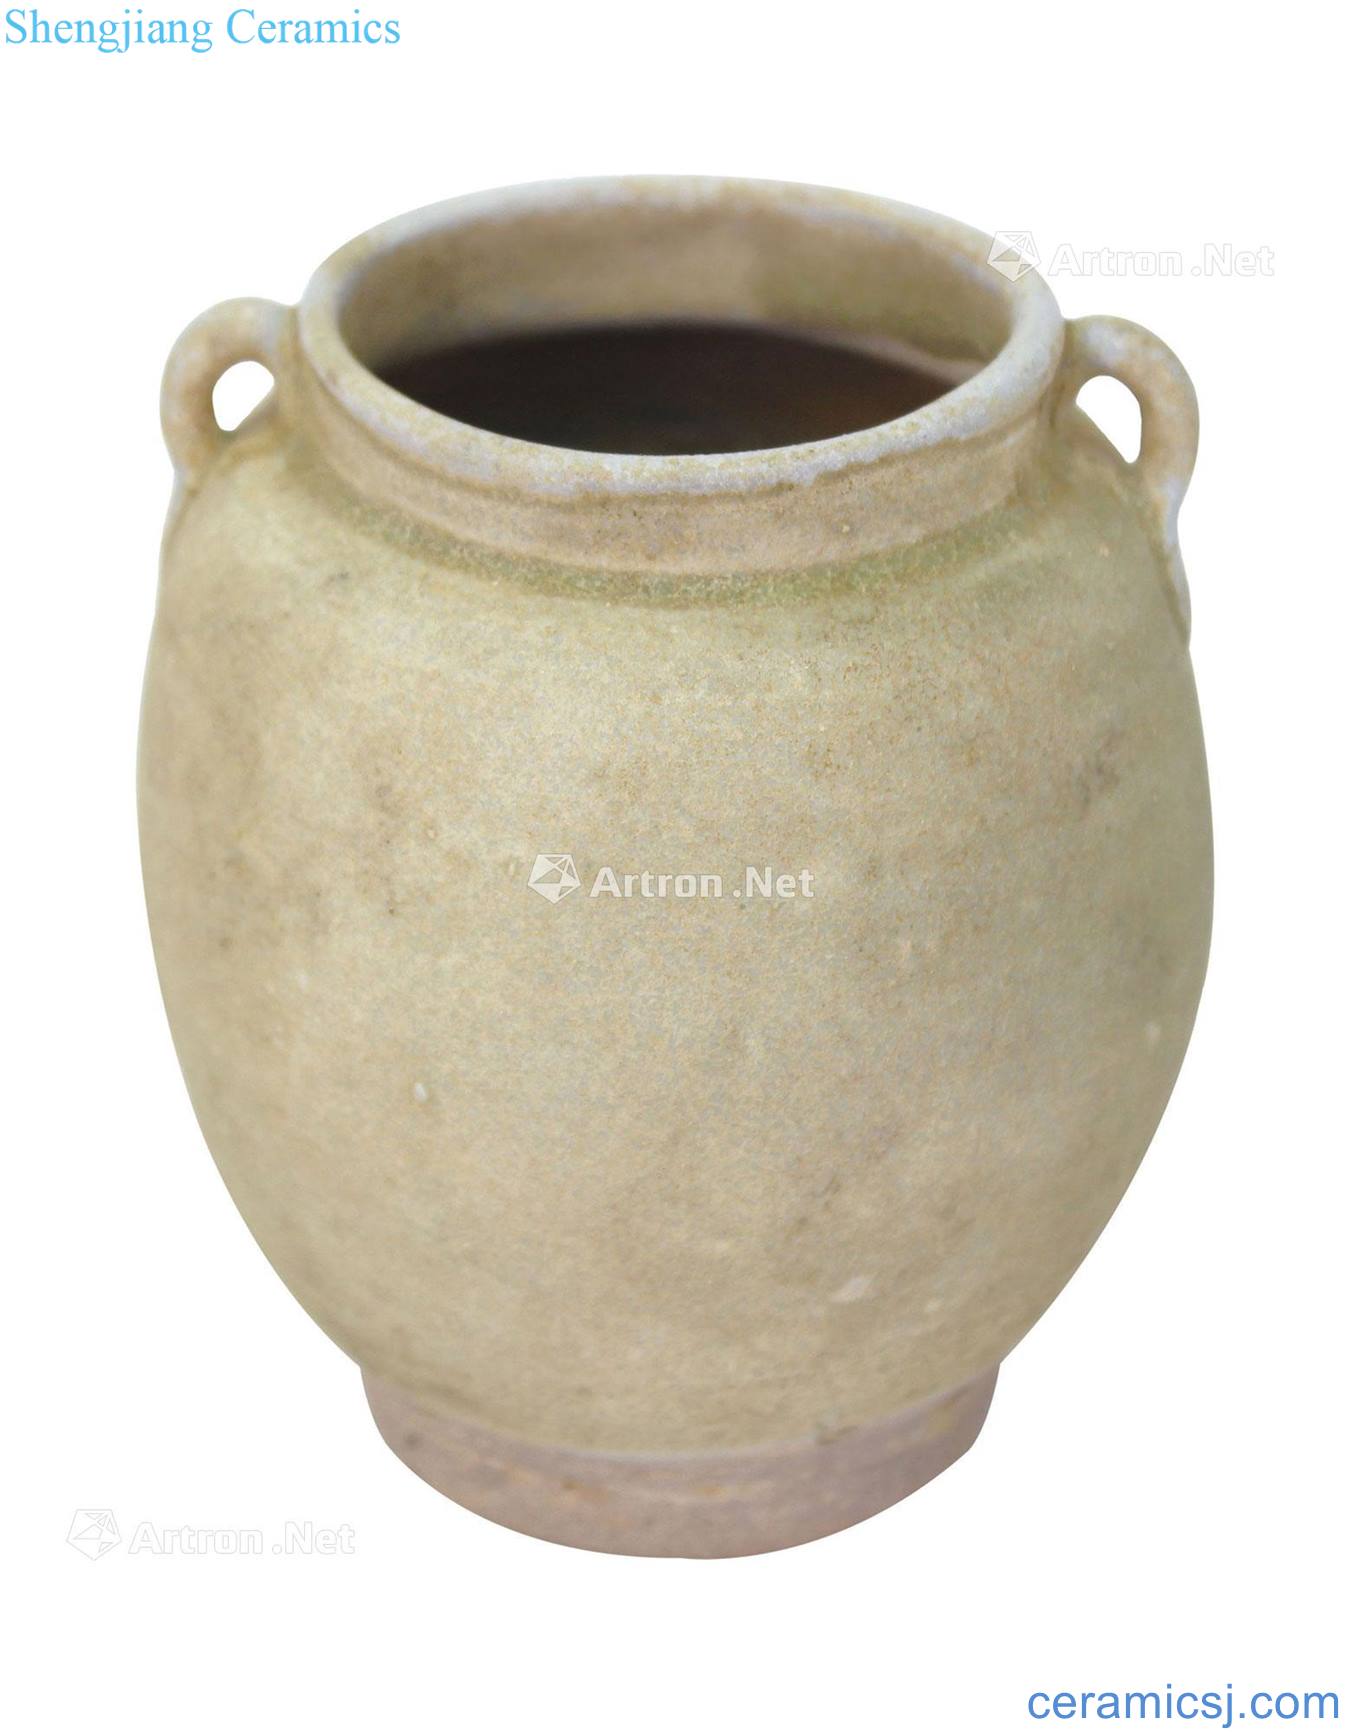 Green glaze double system can